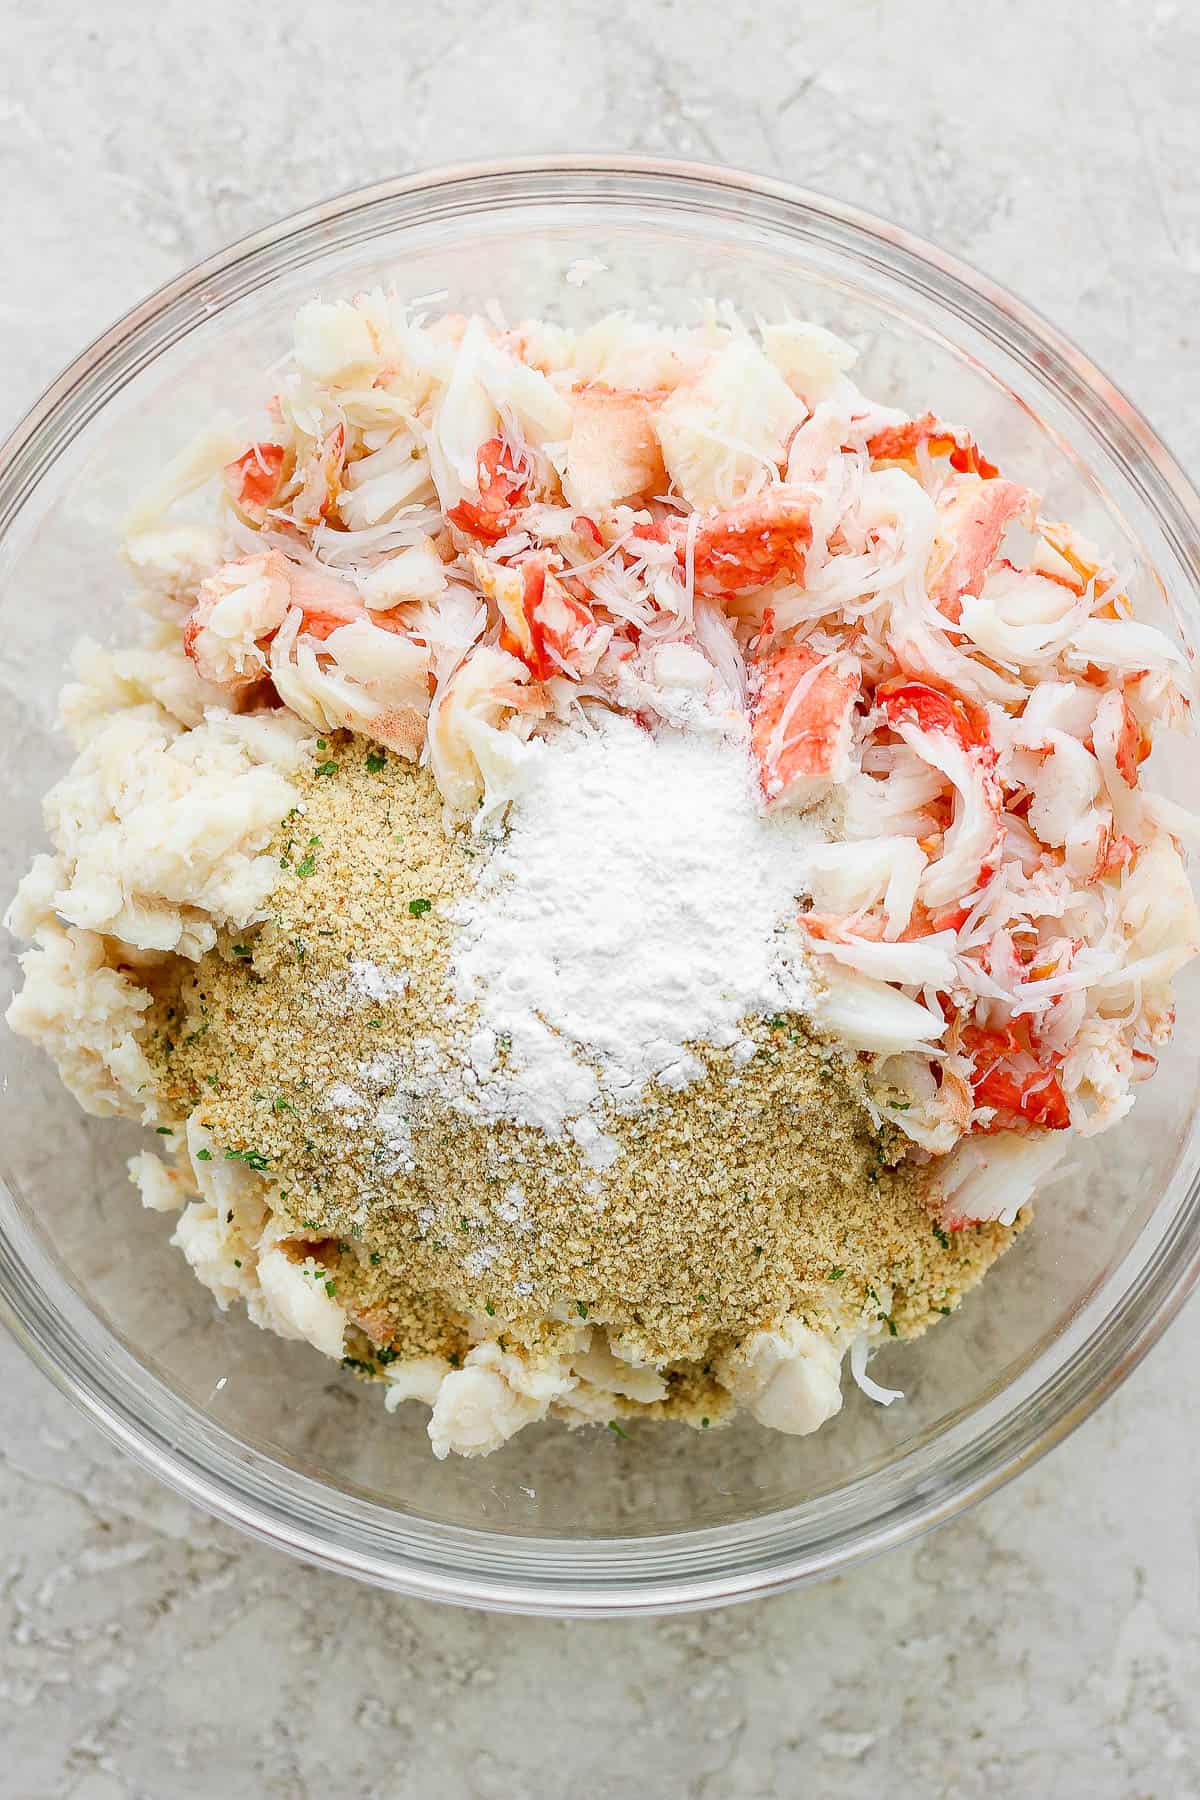 Crab leg meat, lump crab meat, and breadcrumbs in a glass bowl.